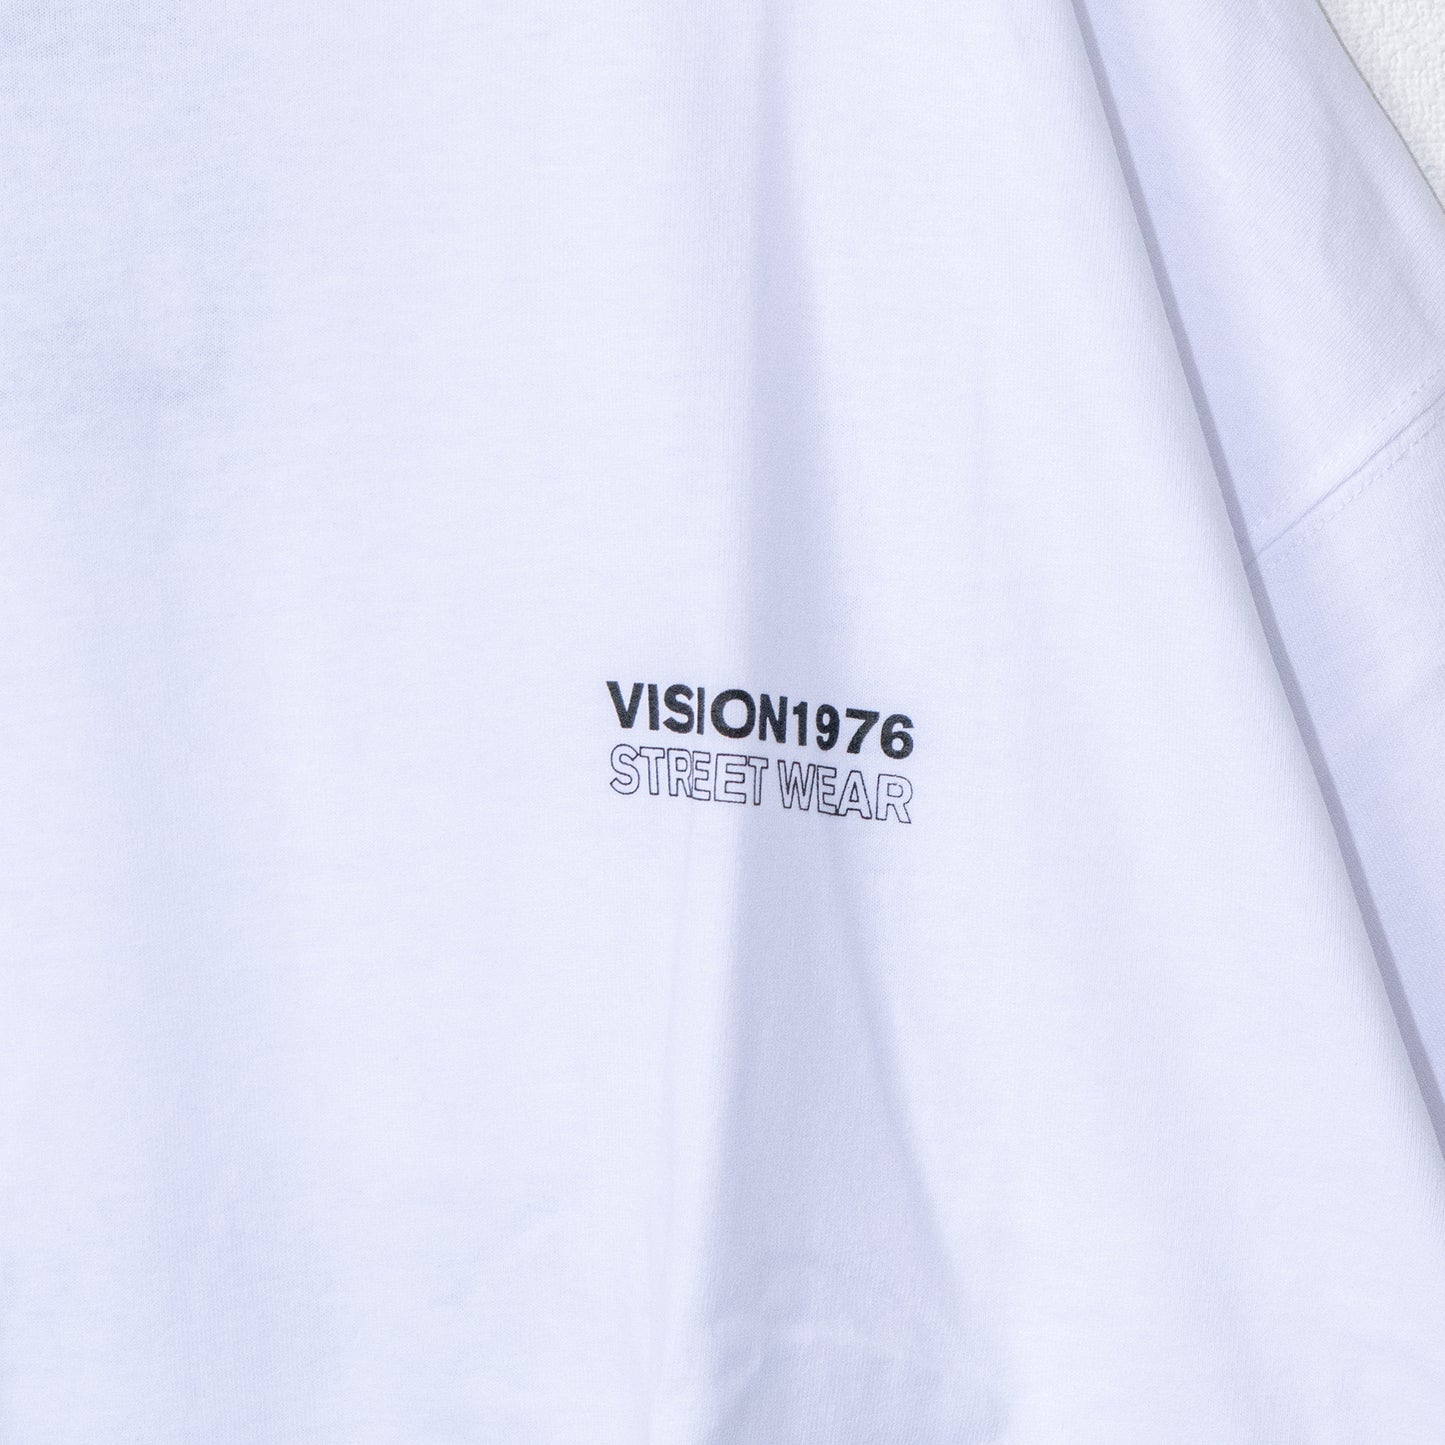 VISION STREET WEAR Shoes Box Print S/S T-shirt (2 color) - YOUAREMYPOISON